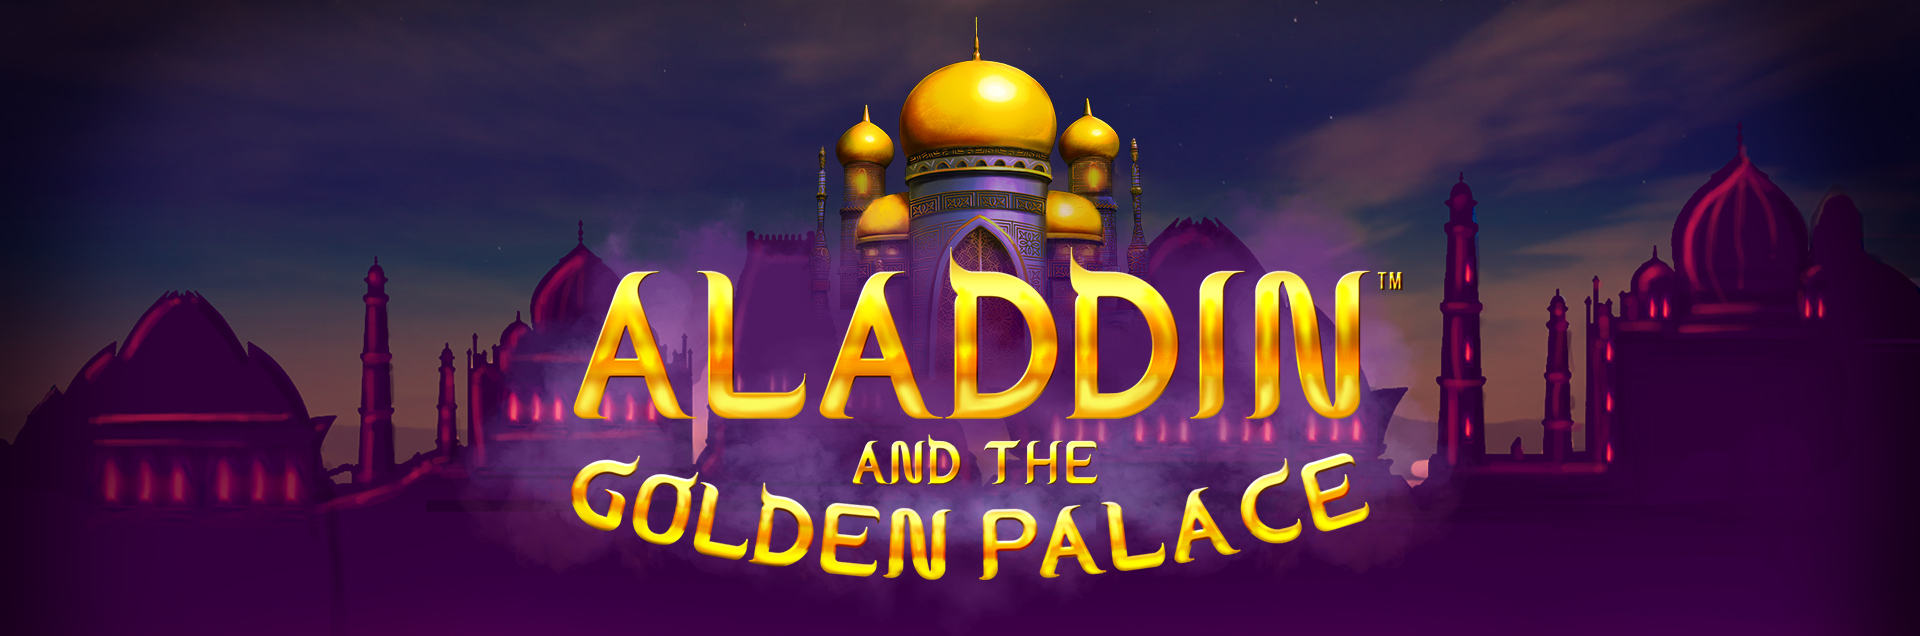 Aladdin and the Golden Palace header banner